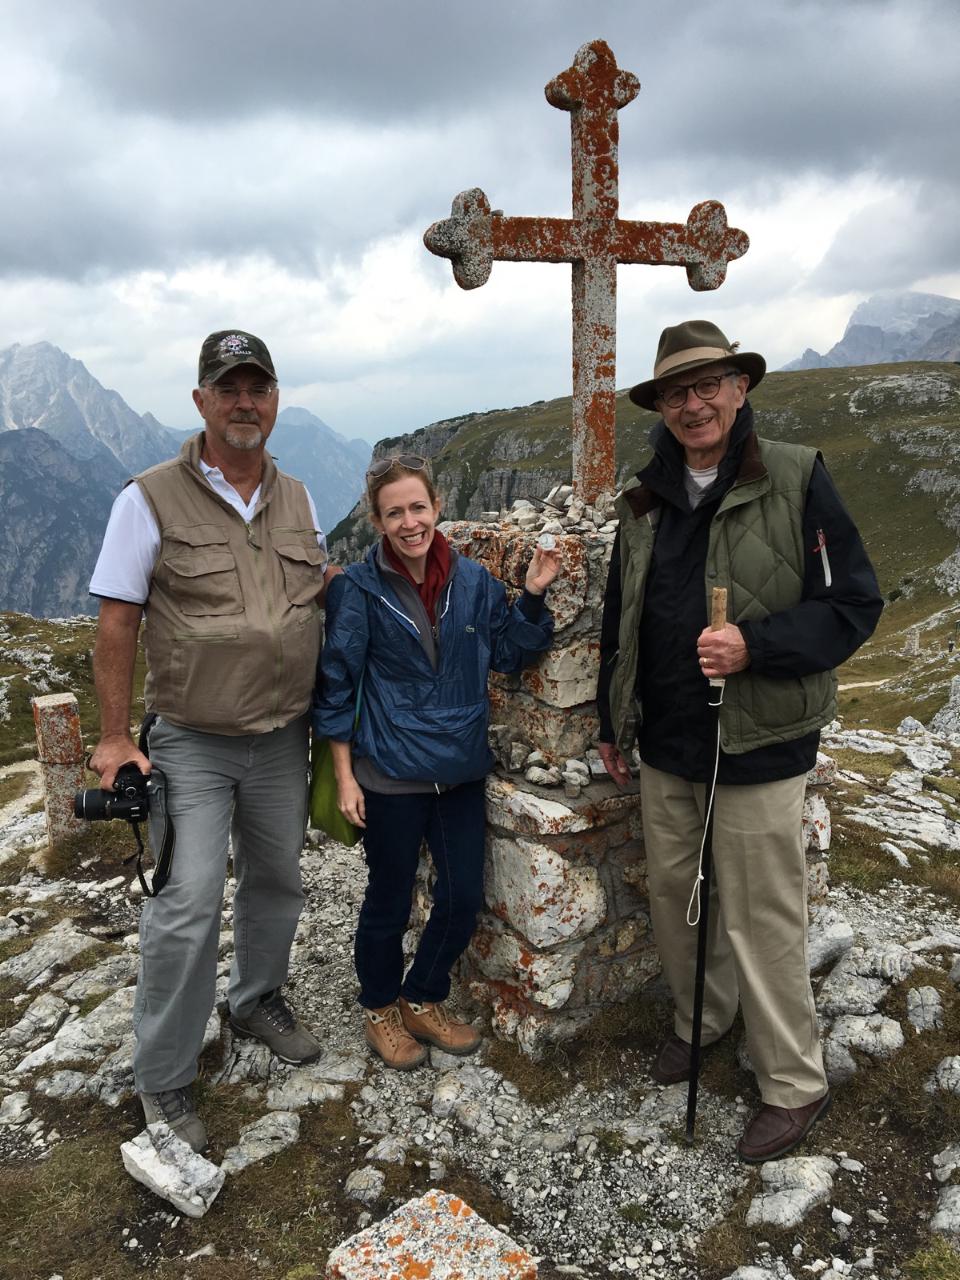 A white woman and two white men dressed in hiking gear posing in front of a cross memorial on a cairn.